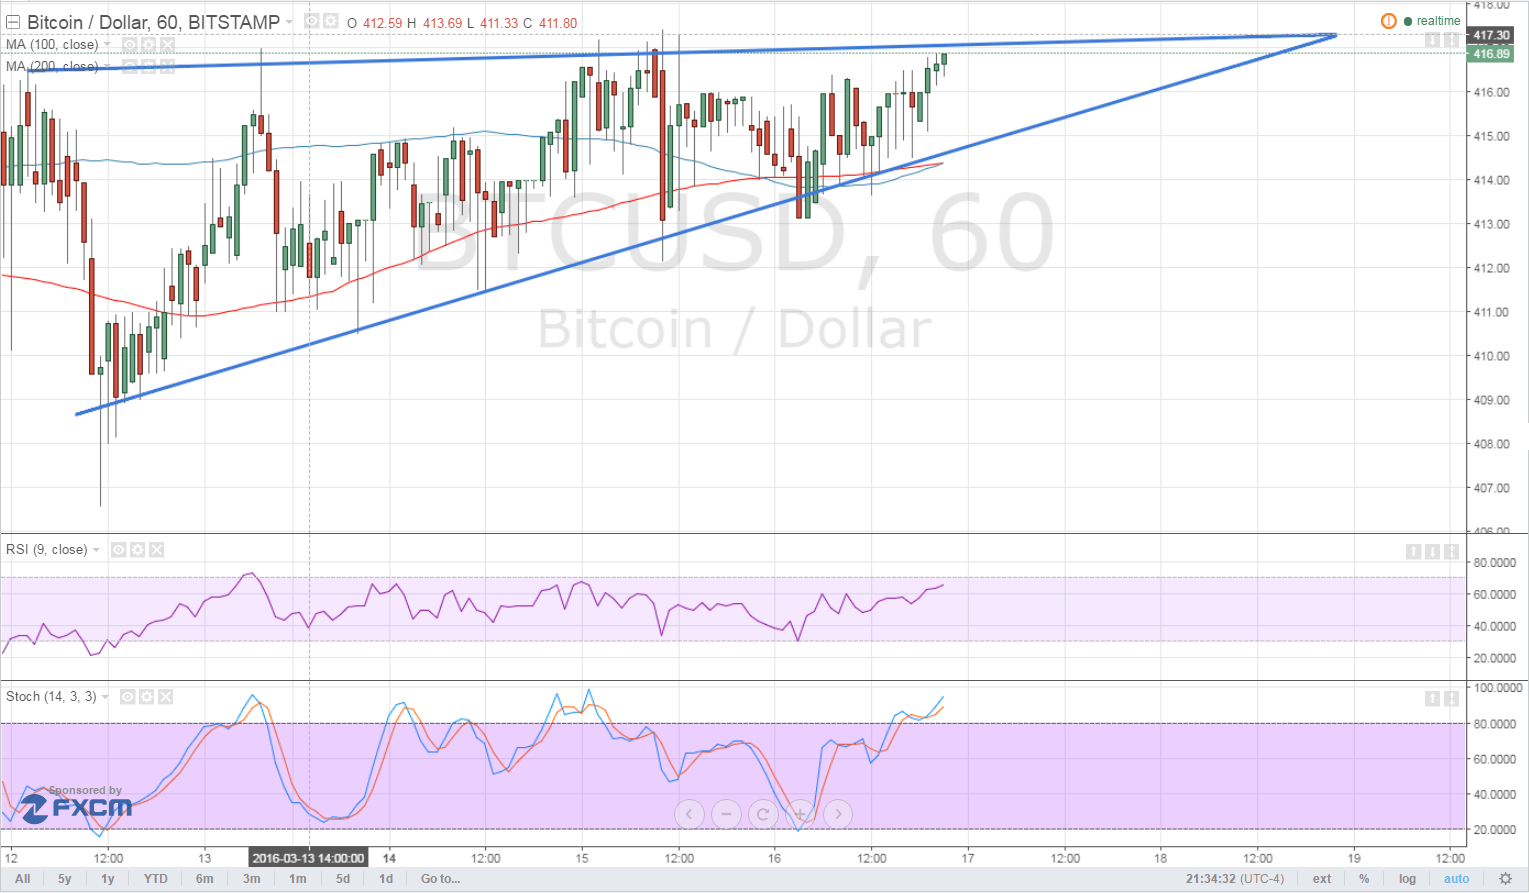 Bitcoin Price Technical Analysis for 03/17/2016 - Bulls Pressing On!